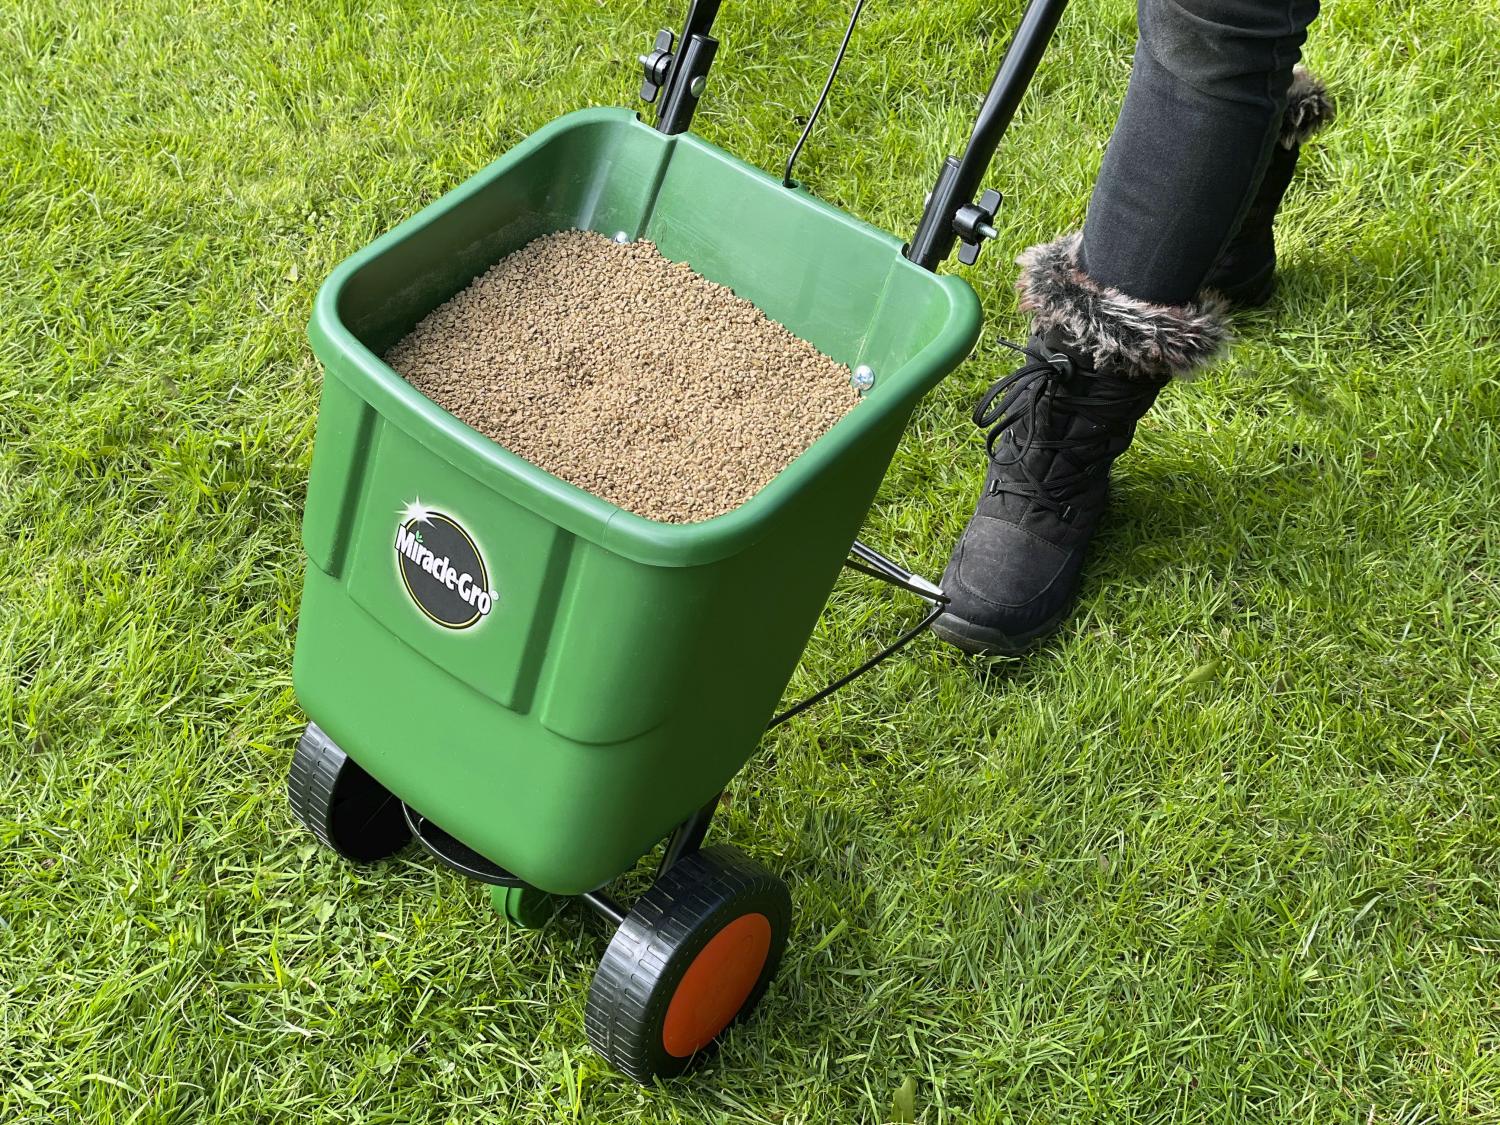 A Miracle-Gro lawn seed spreader filled with grass seed on a lawn.